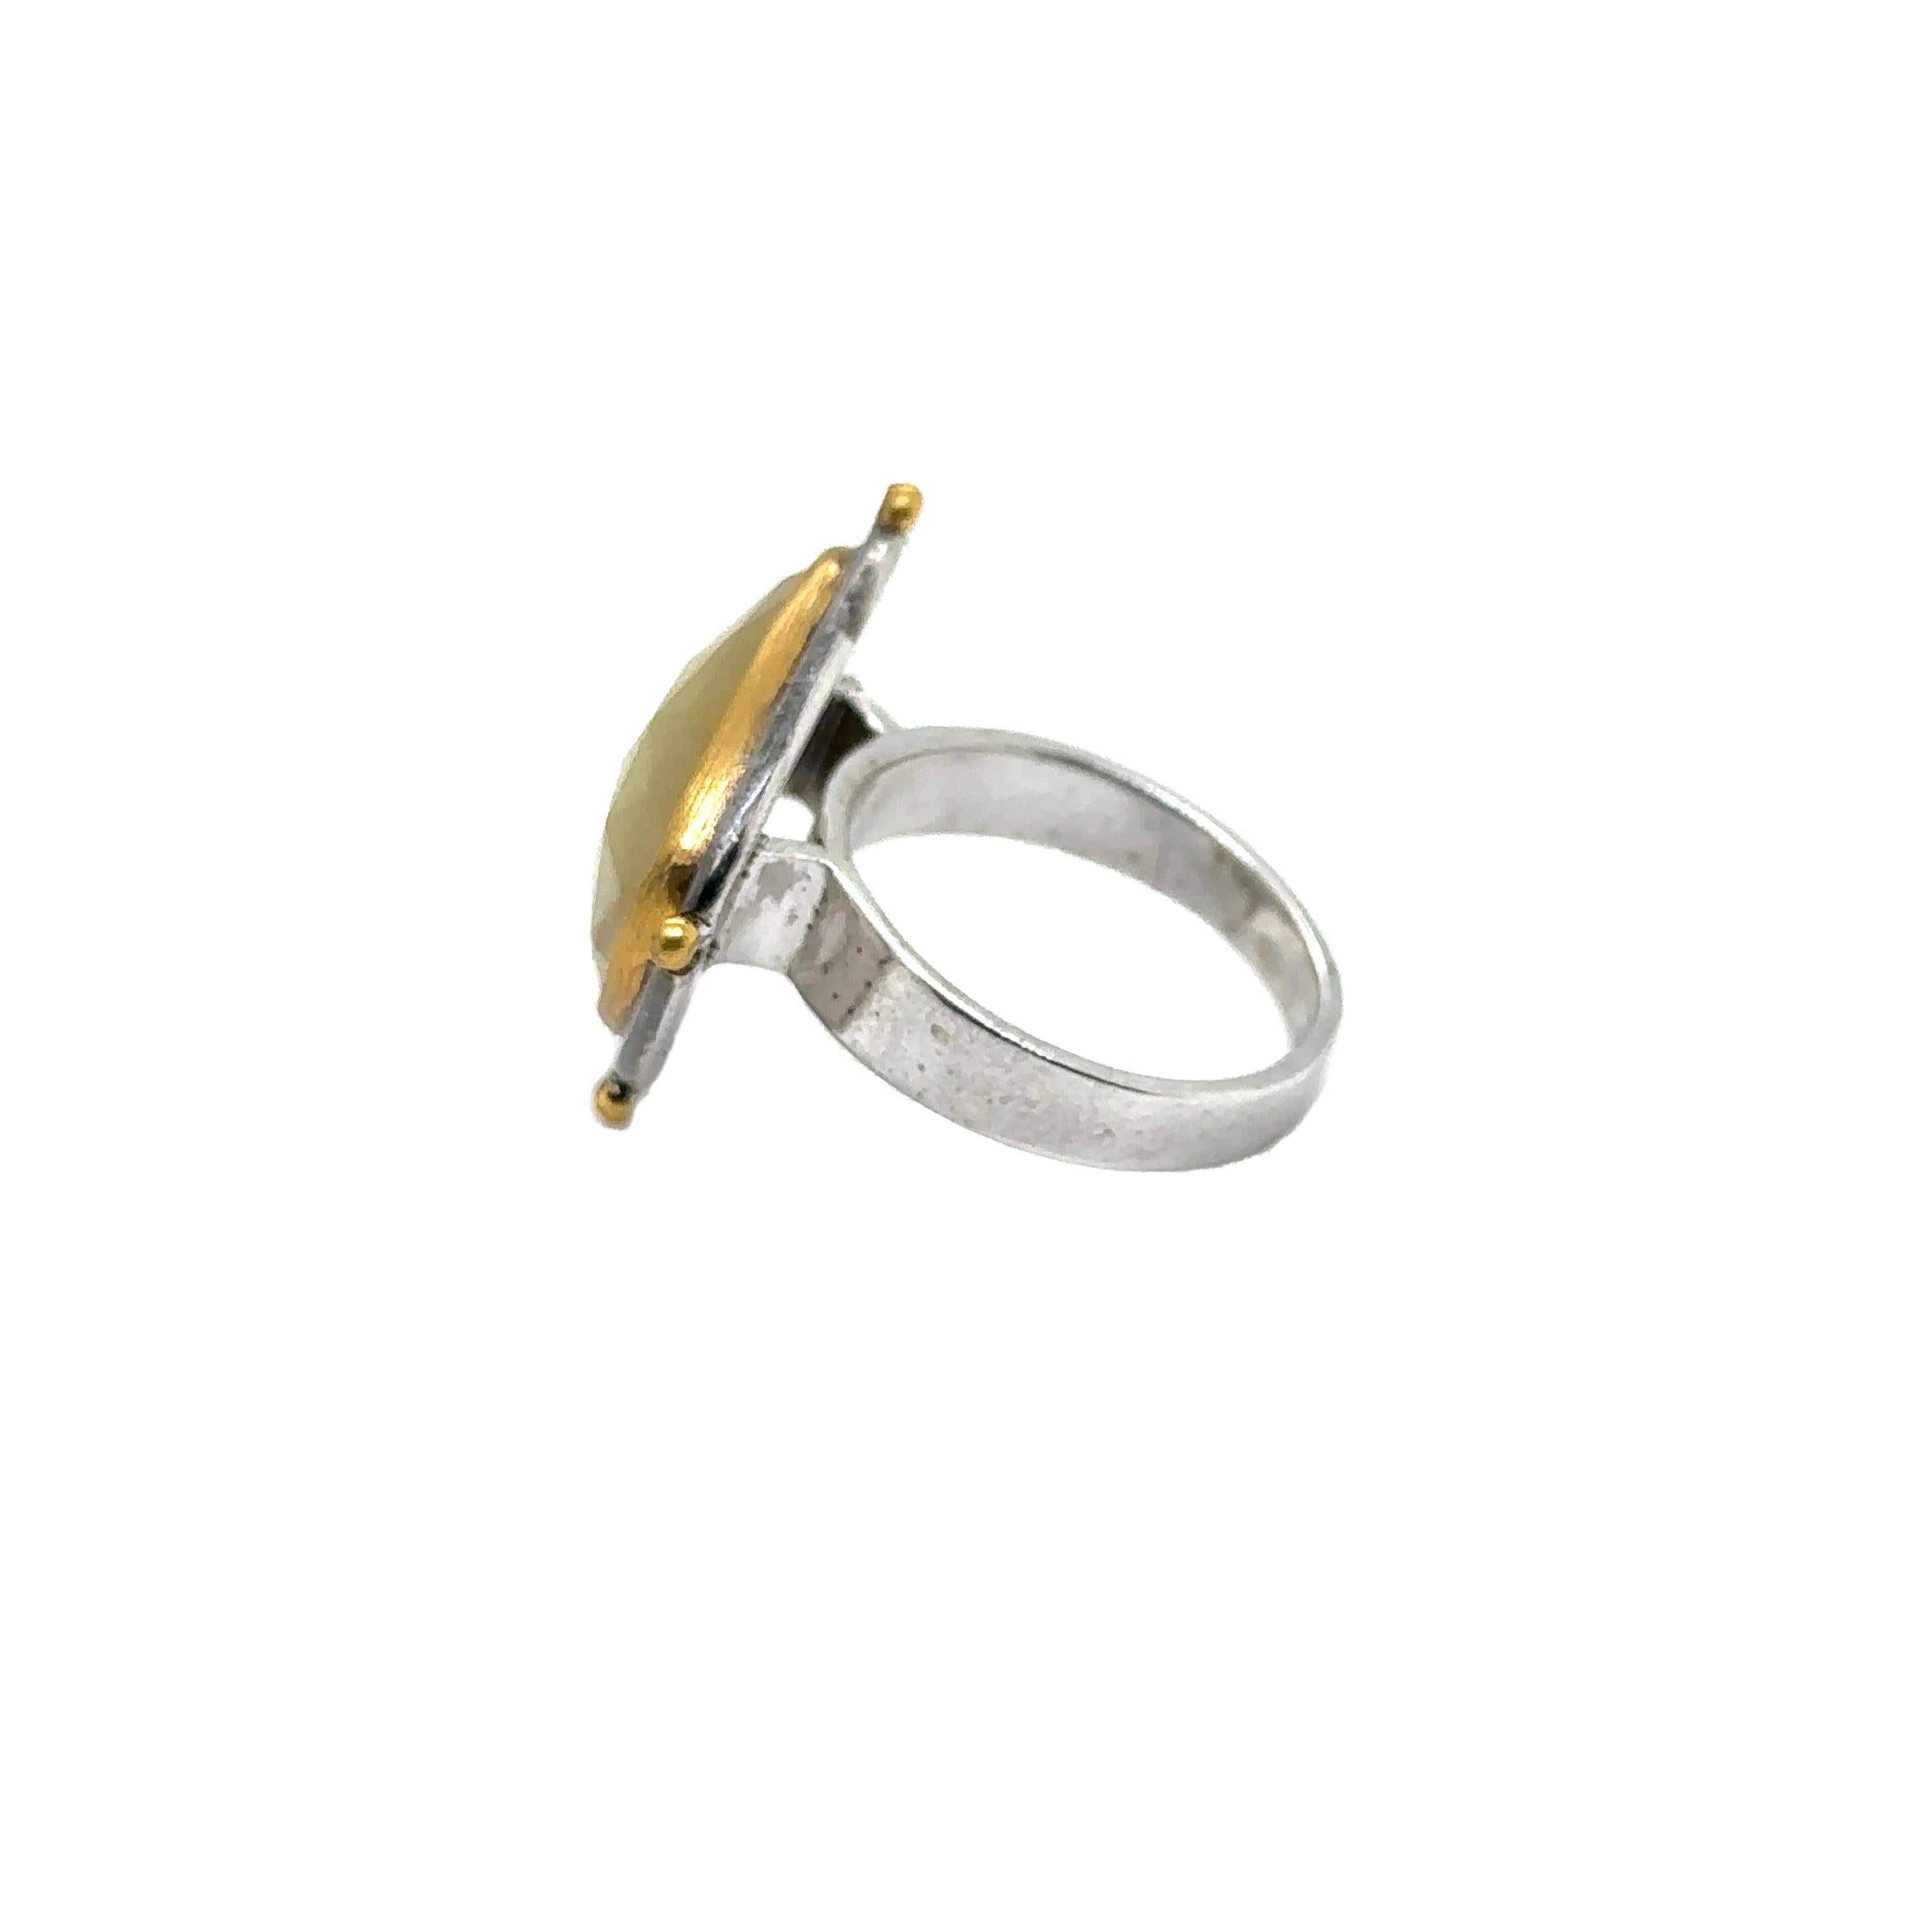 JAS-19-1835 - 24K/SS HANDMADE RING w CHROME DIOPSIDES & NATURAL YELLOW SAPPHIRE For Sale 8